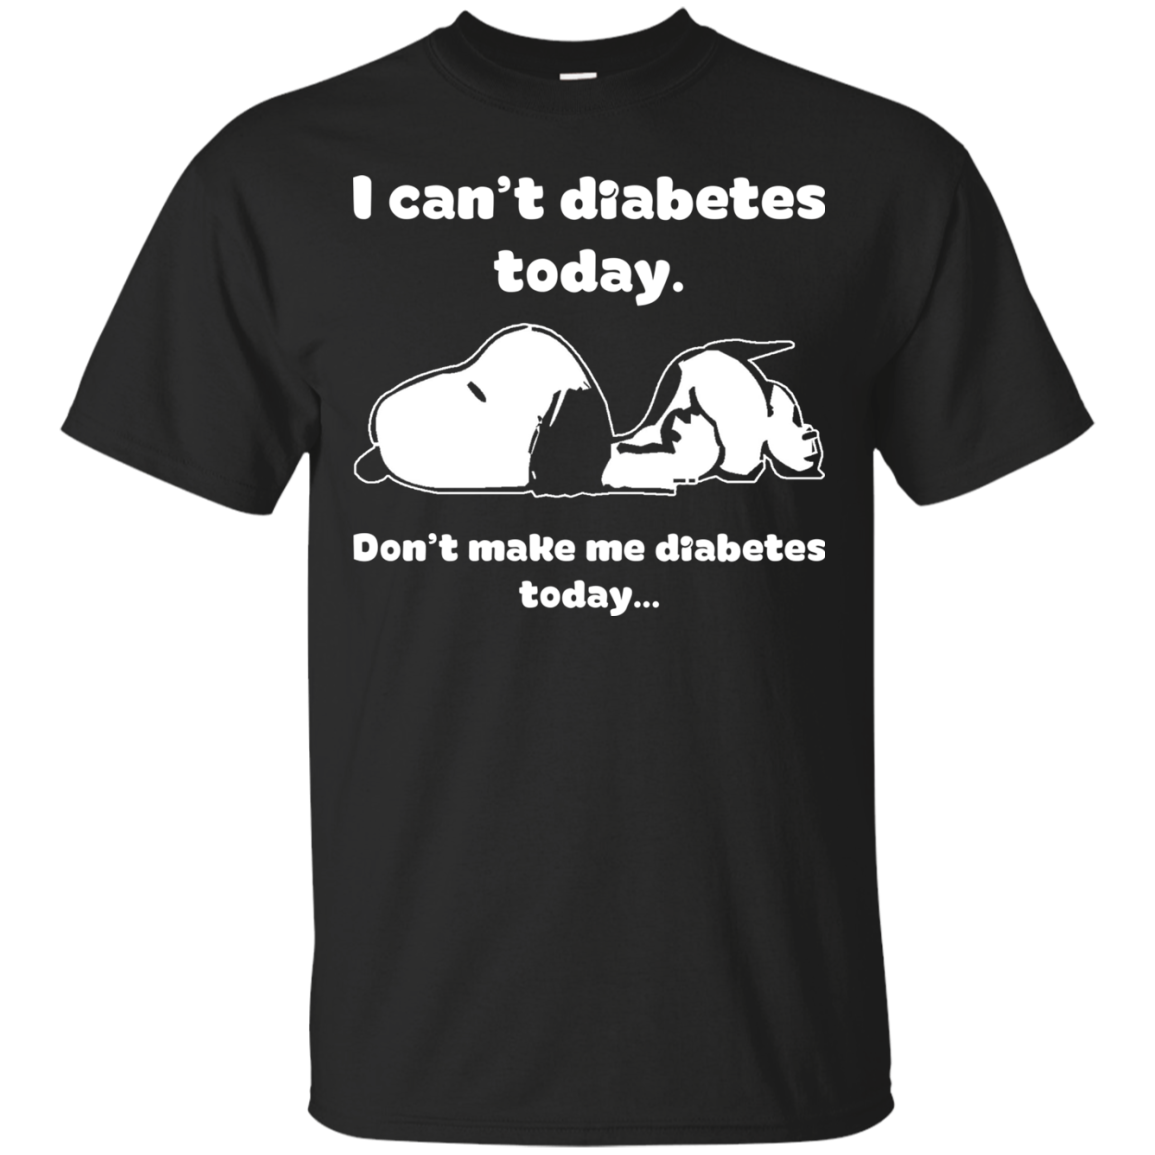 Snoopy: I can’t diabetes today, Don’t make me diabetes today shirt, hoodie, tank